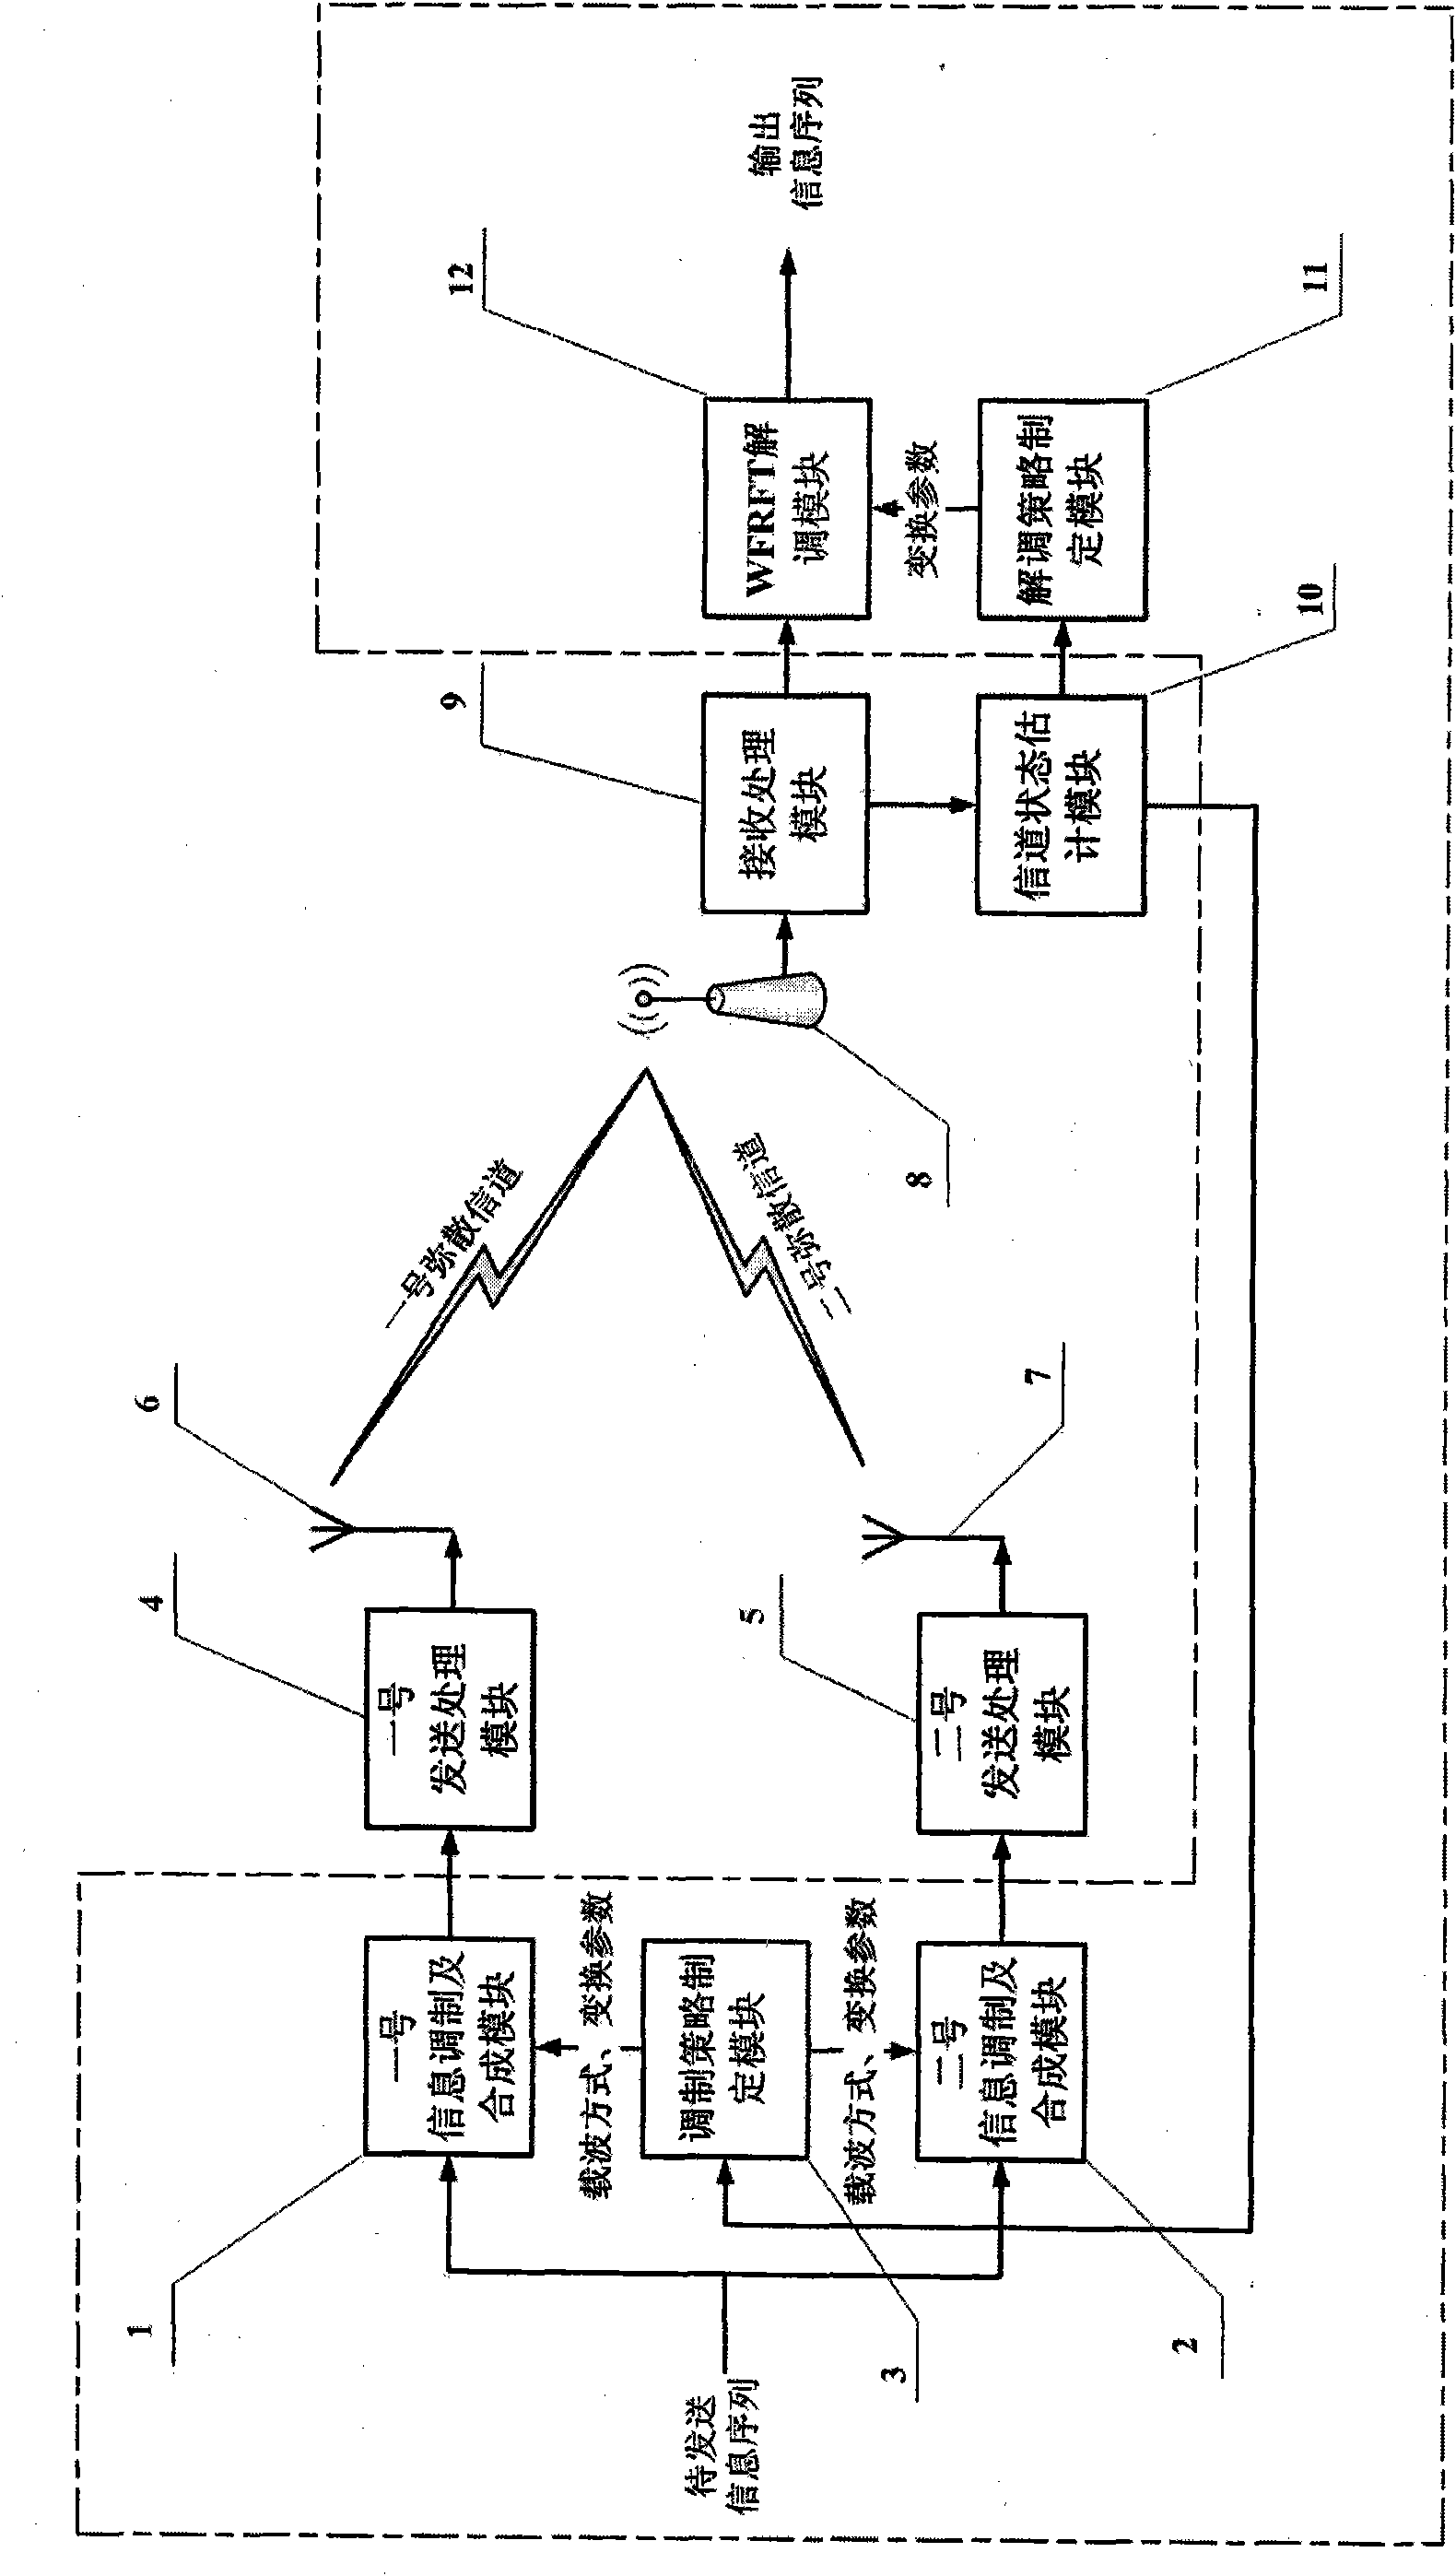 Carrier wave coordination communication method based on four-item weight score Fourier conversion and distributed transmitting antenna